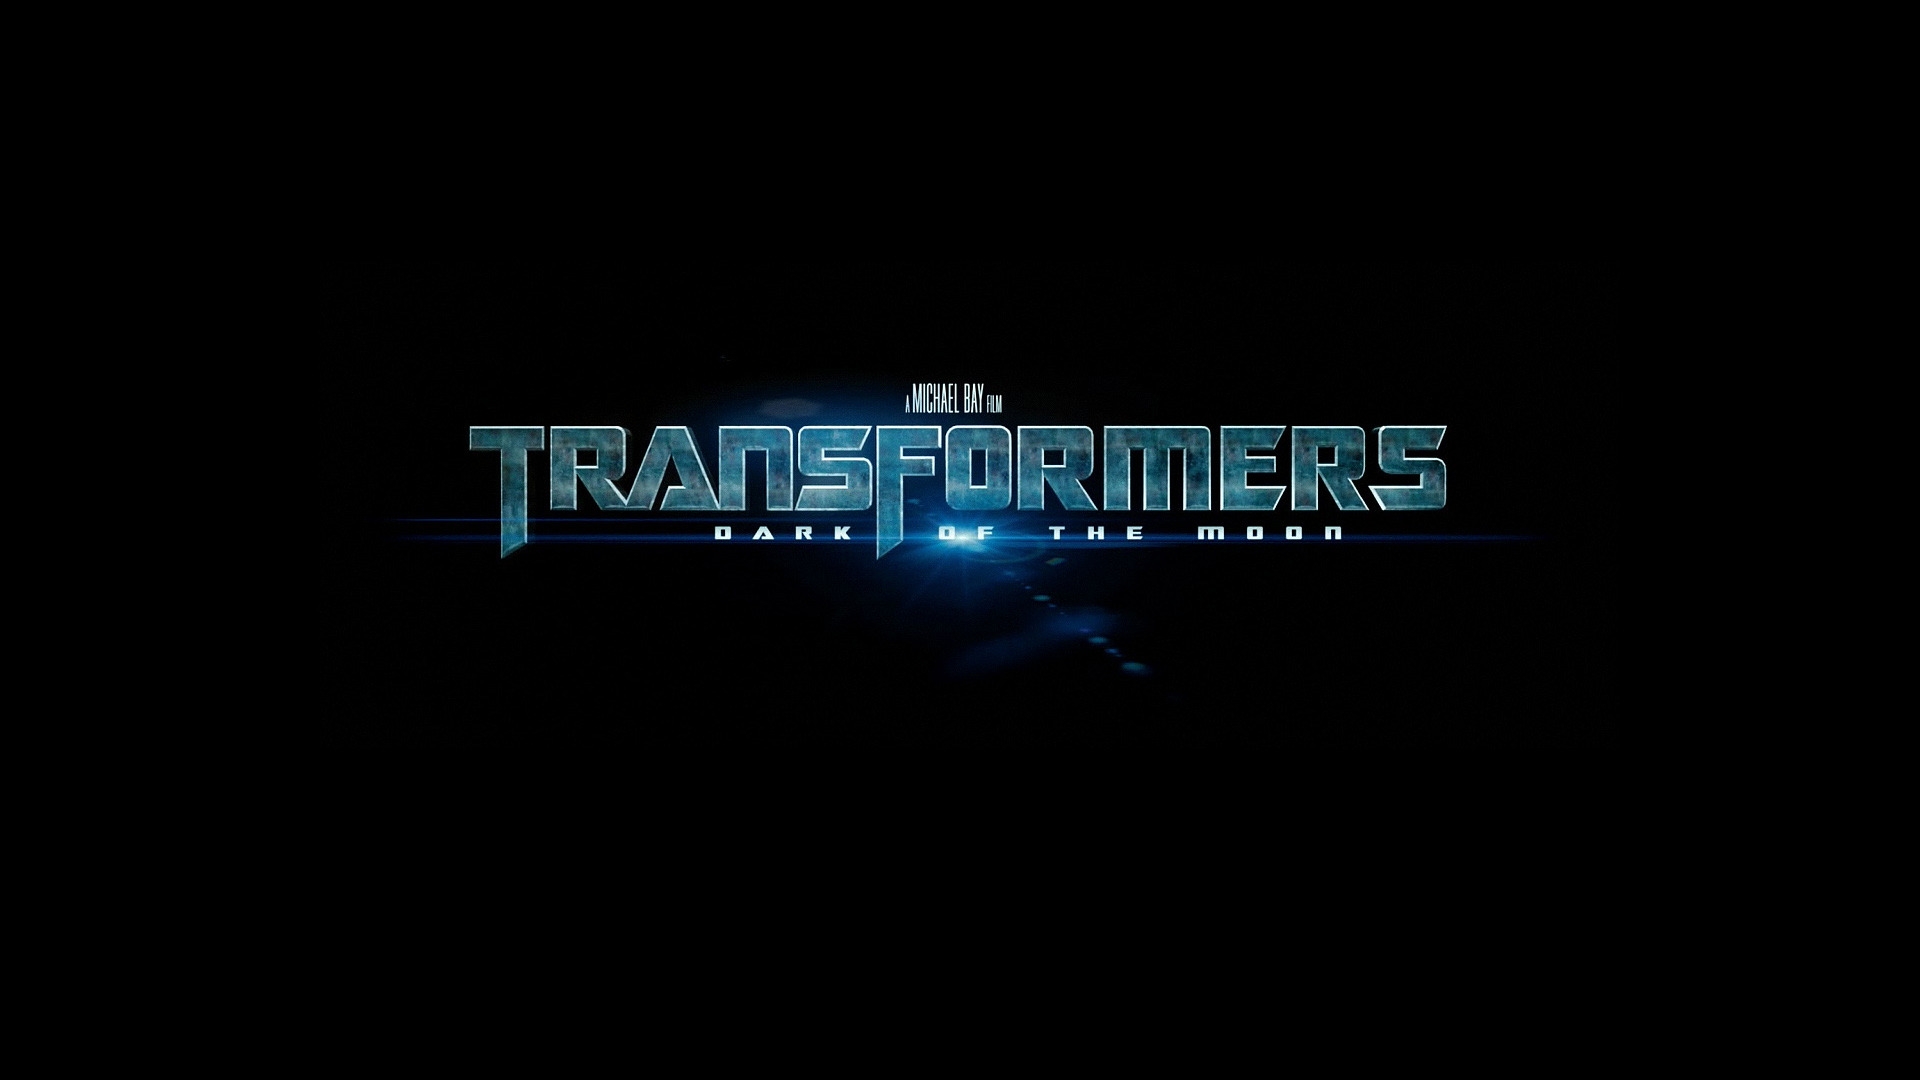 Transformers 3 2011 for 1920 x 1080 HDTV 1080p resolution